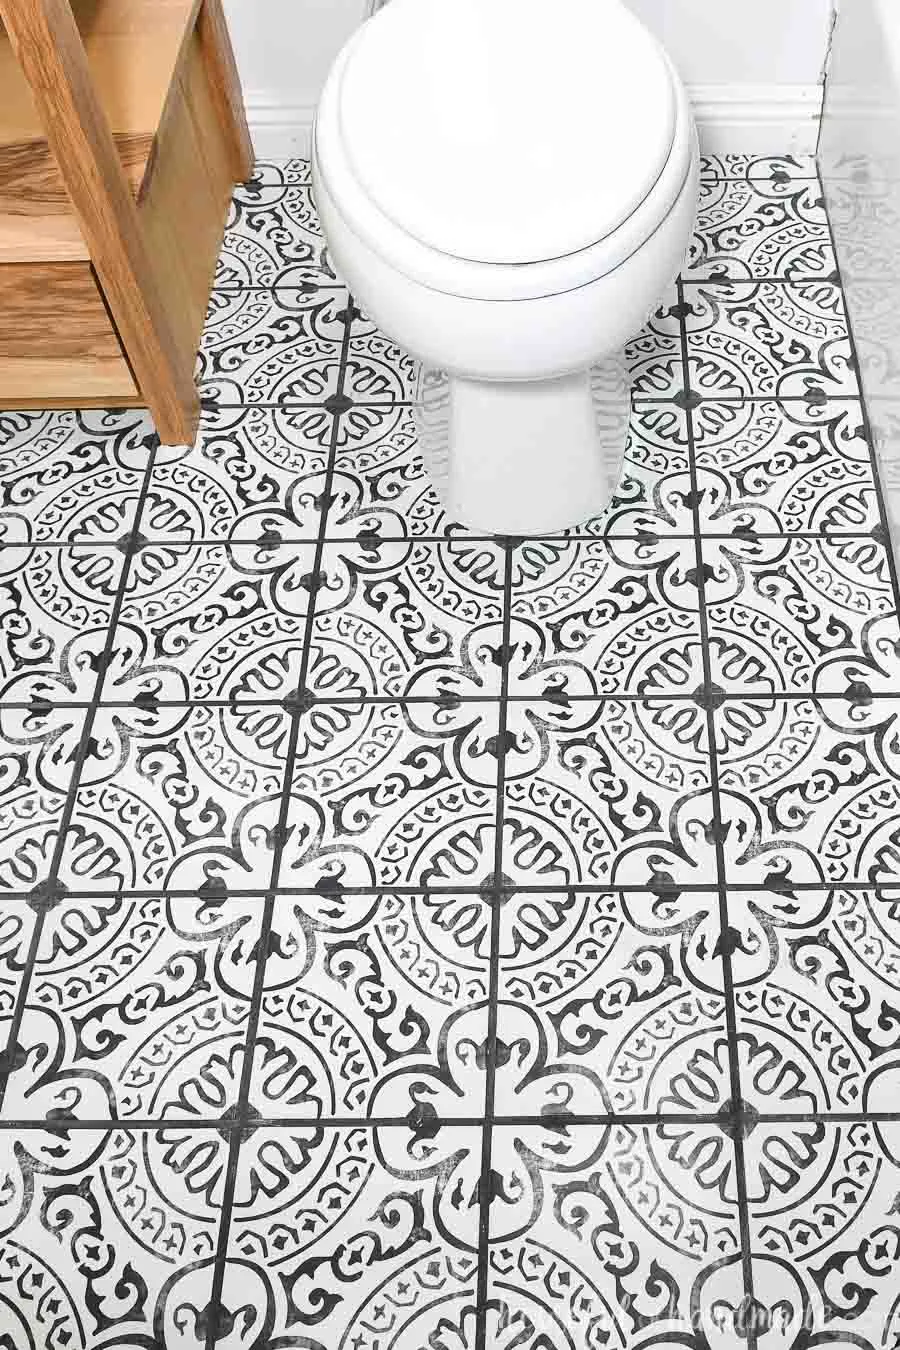 Laying Floor Tiles In A Small Bathroom, Floor Tile Patterns For Small Bathrooms